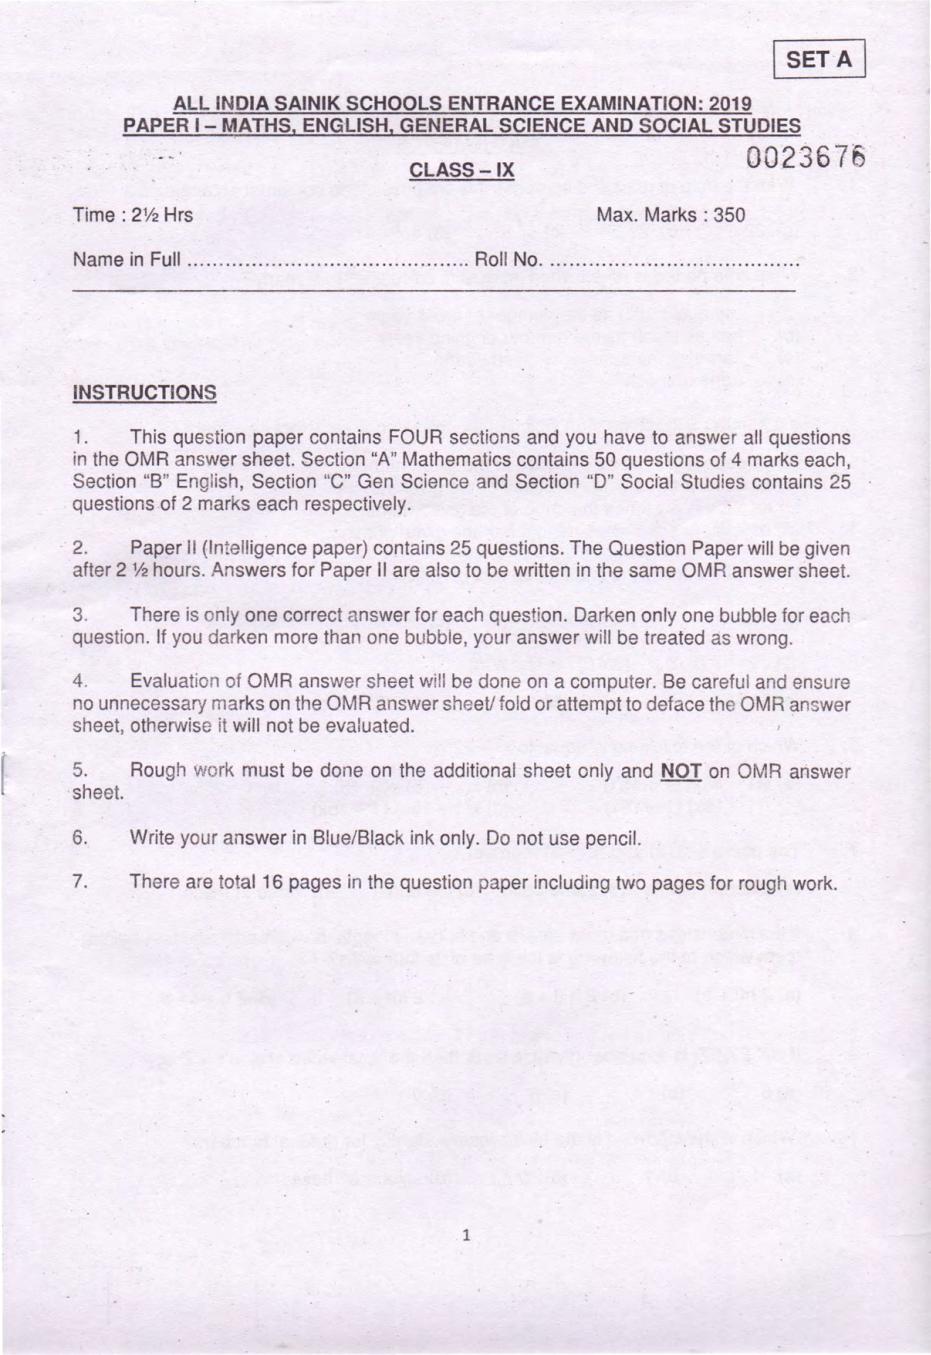 School Entrance Exam Sample Paper for Class 9 (AISSEE) Paper 1 and Paper 2 - Page 1